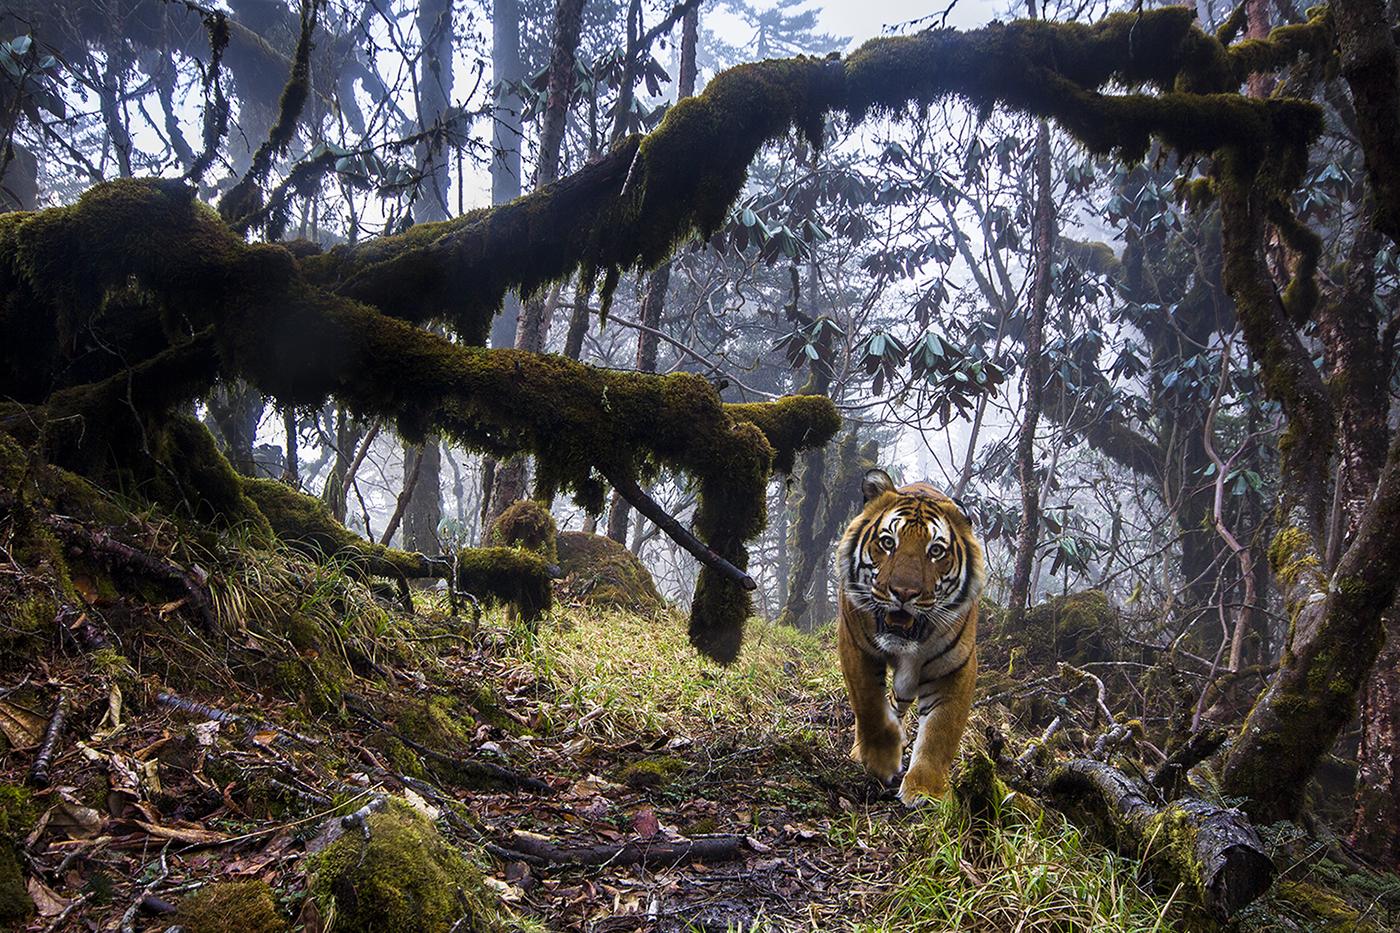 To capture this shot, photographer Emmanuel Rondeau set up eight triggered cameras in the Trongsa District of the Kingdom of Bhutan. Working with local rangers, he chose locations known to see tigers passing through. (© Emmanuel Rondeau, France)